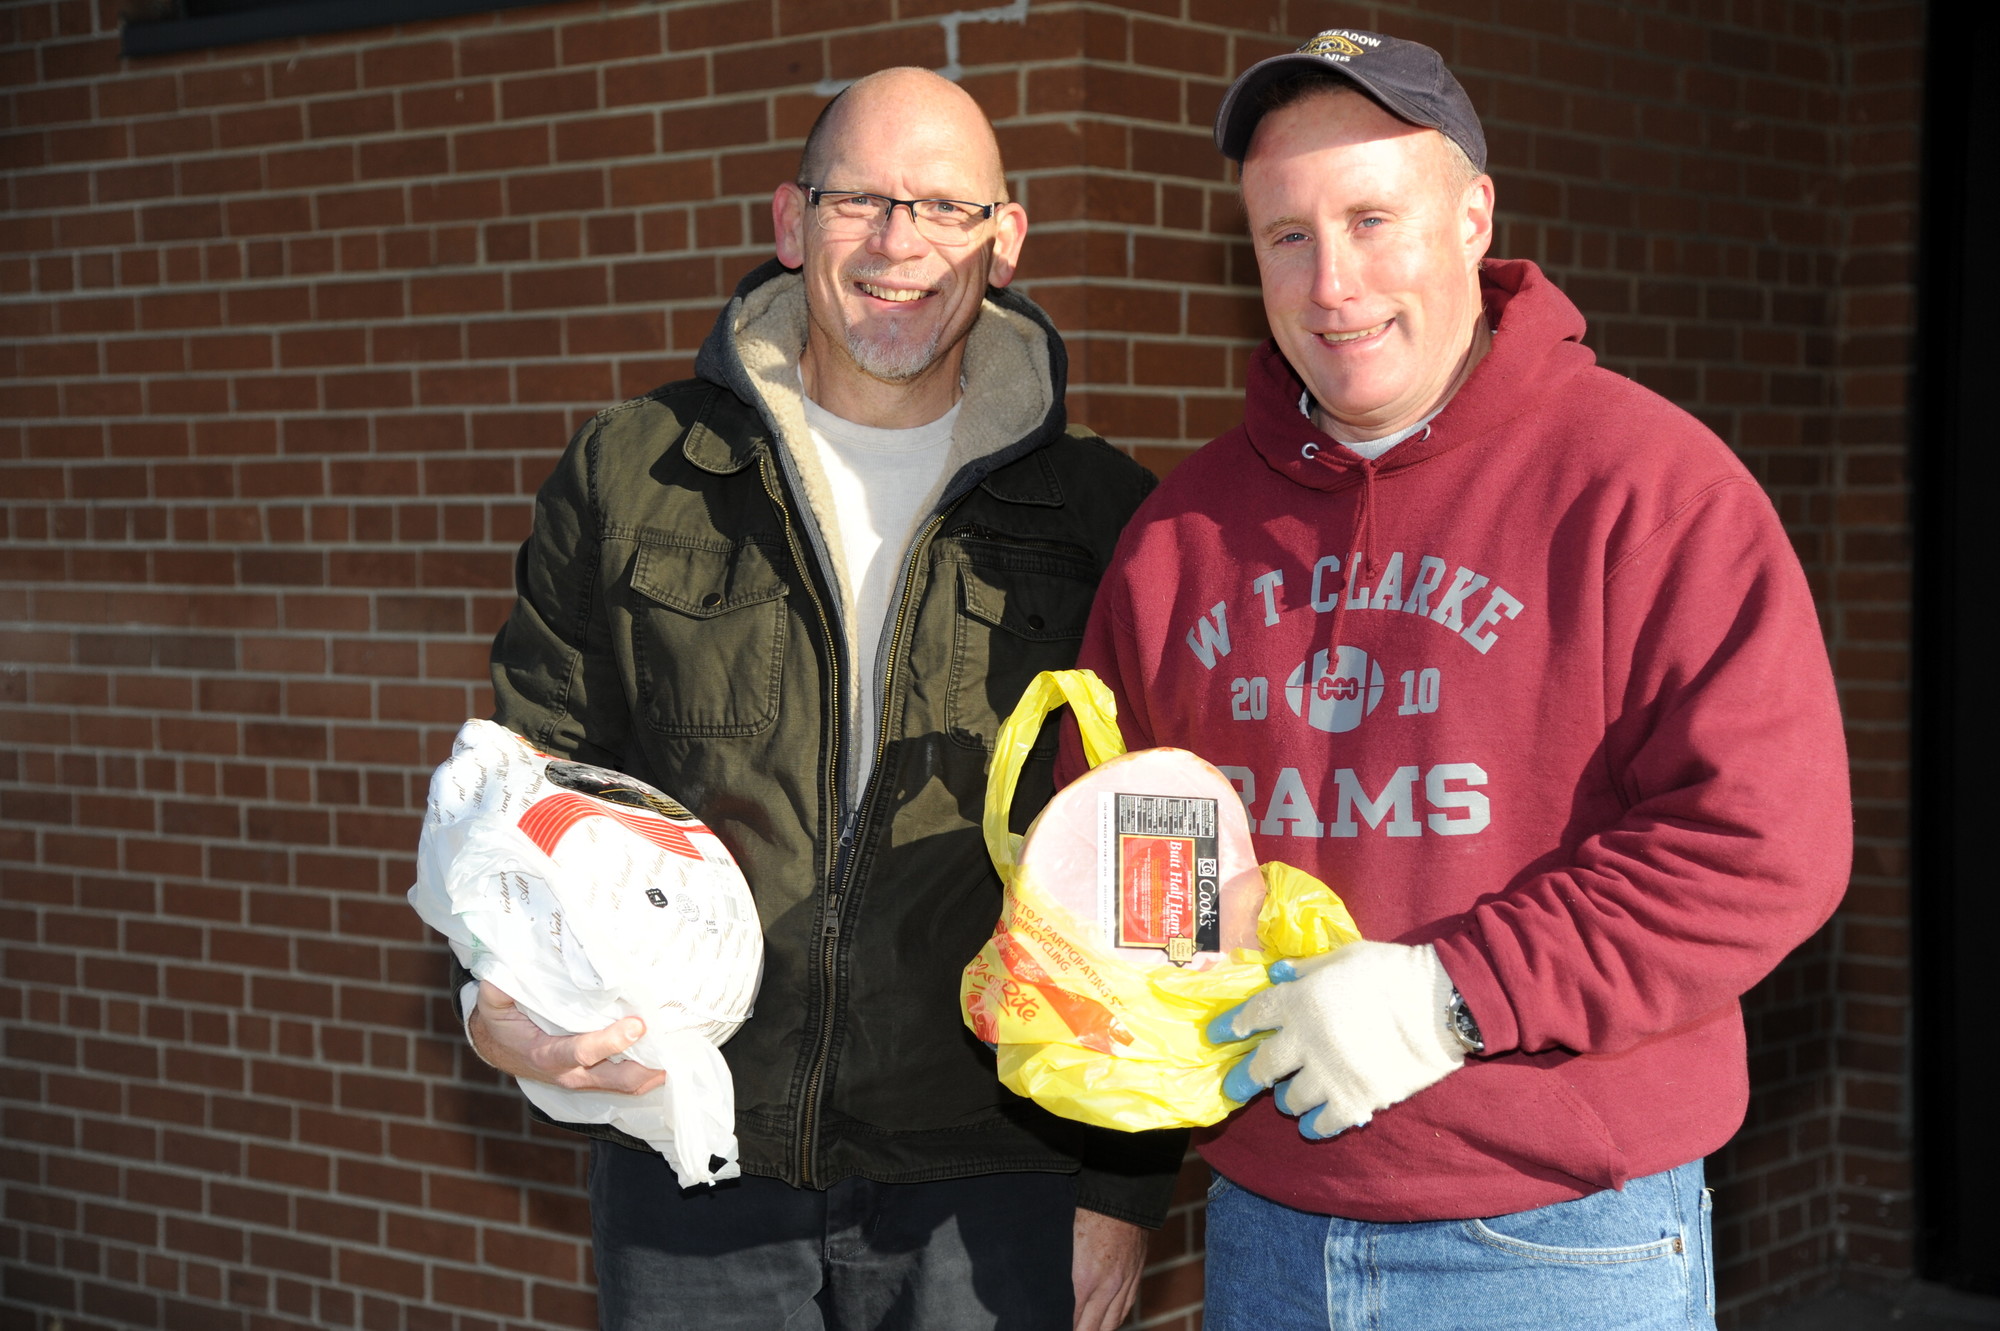 Tim Voels and Brian O’Flaherty, the East Meadow Kiwanis Club president, put together holiday baskets for families in the community, complete with turkey and hams, this weekend at W.T. Clarke High School.